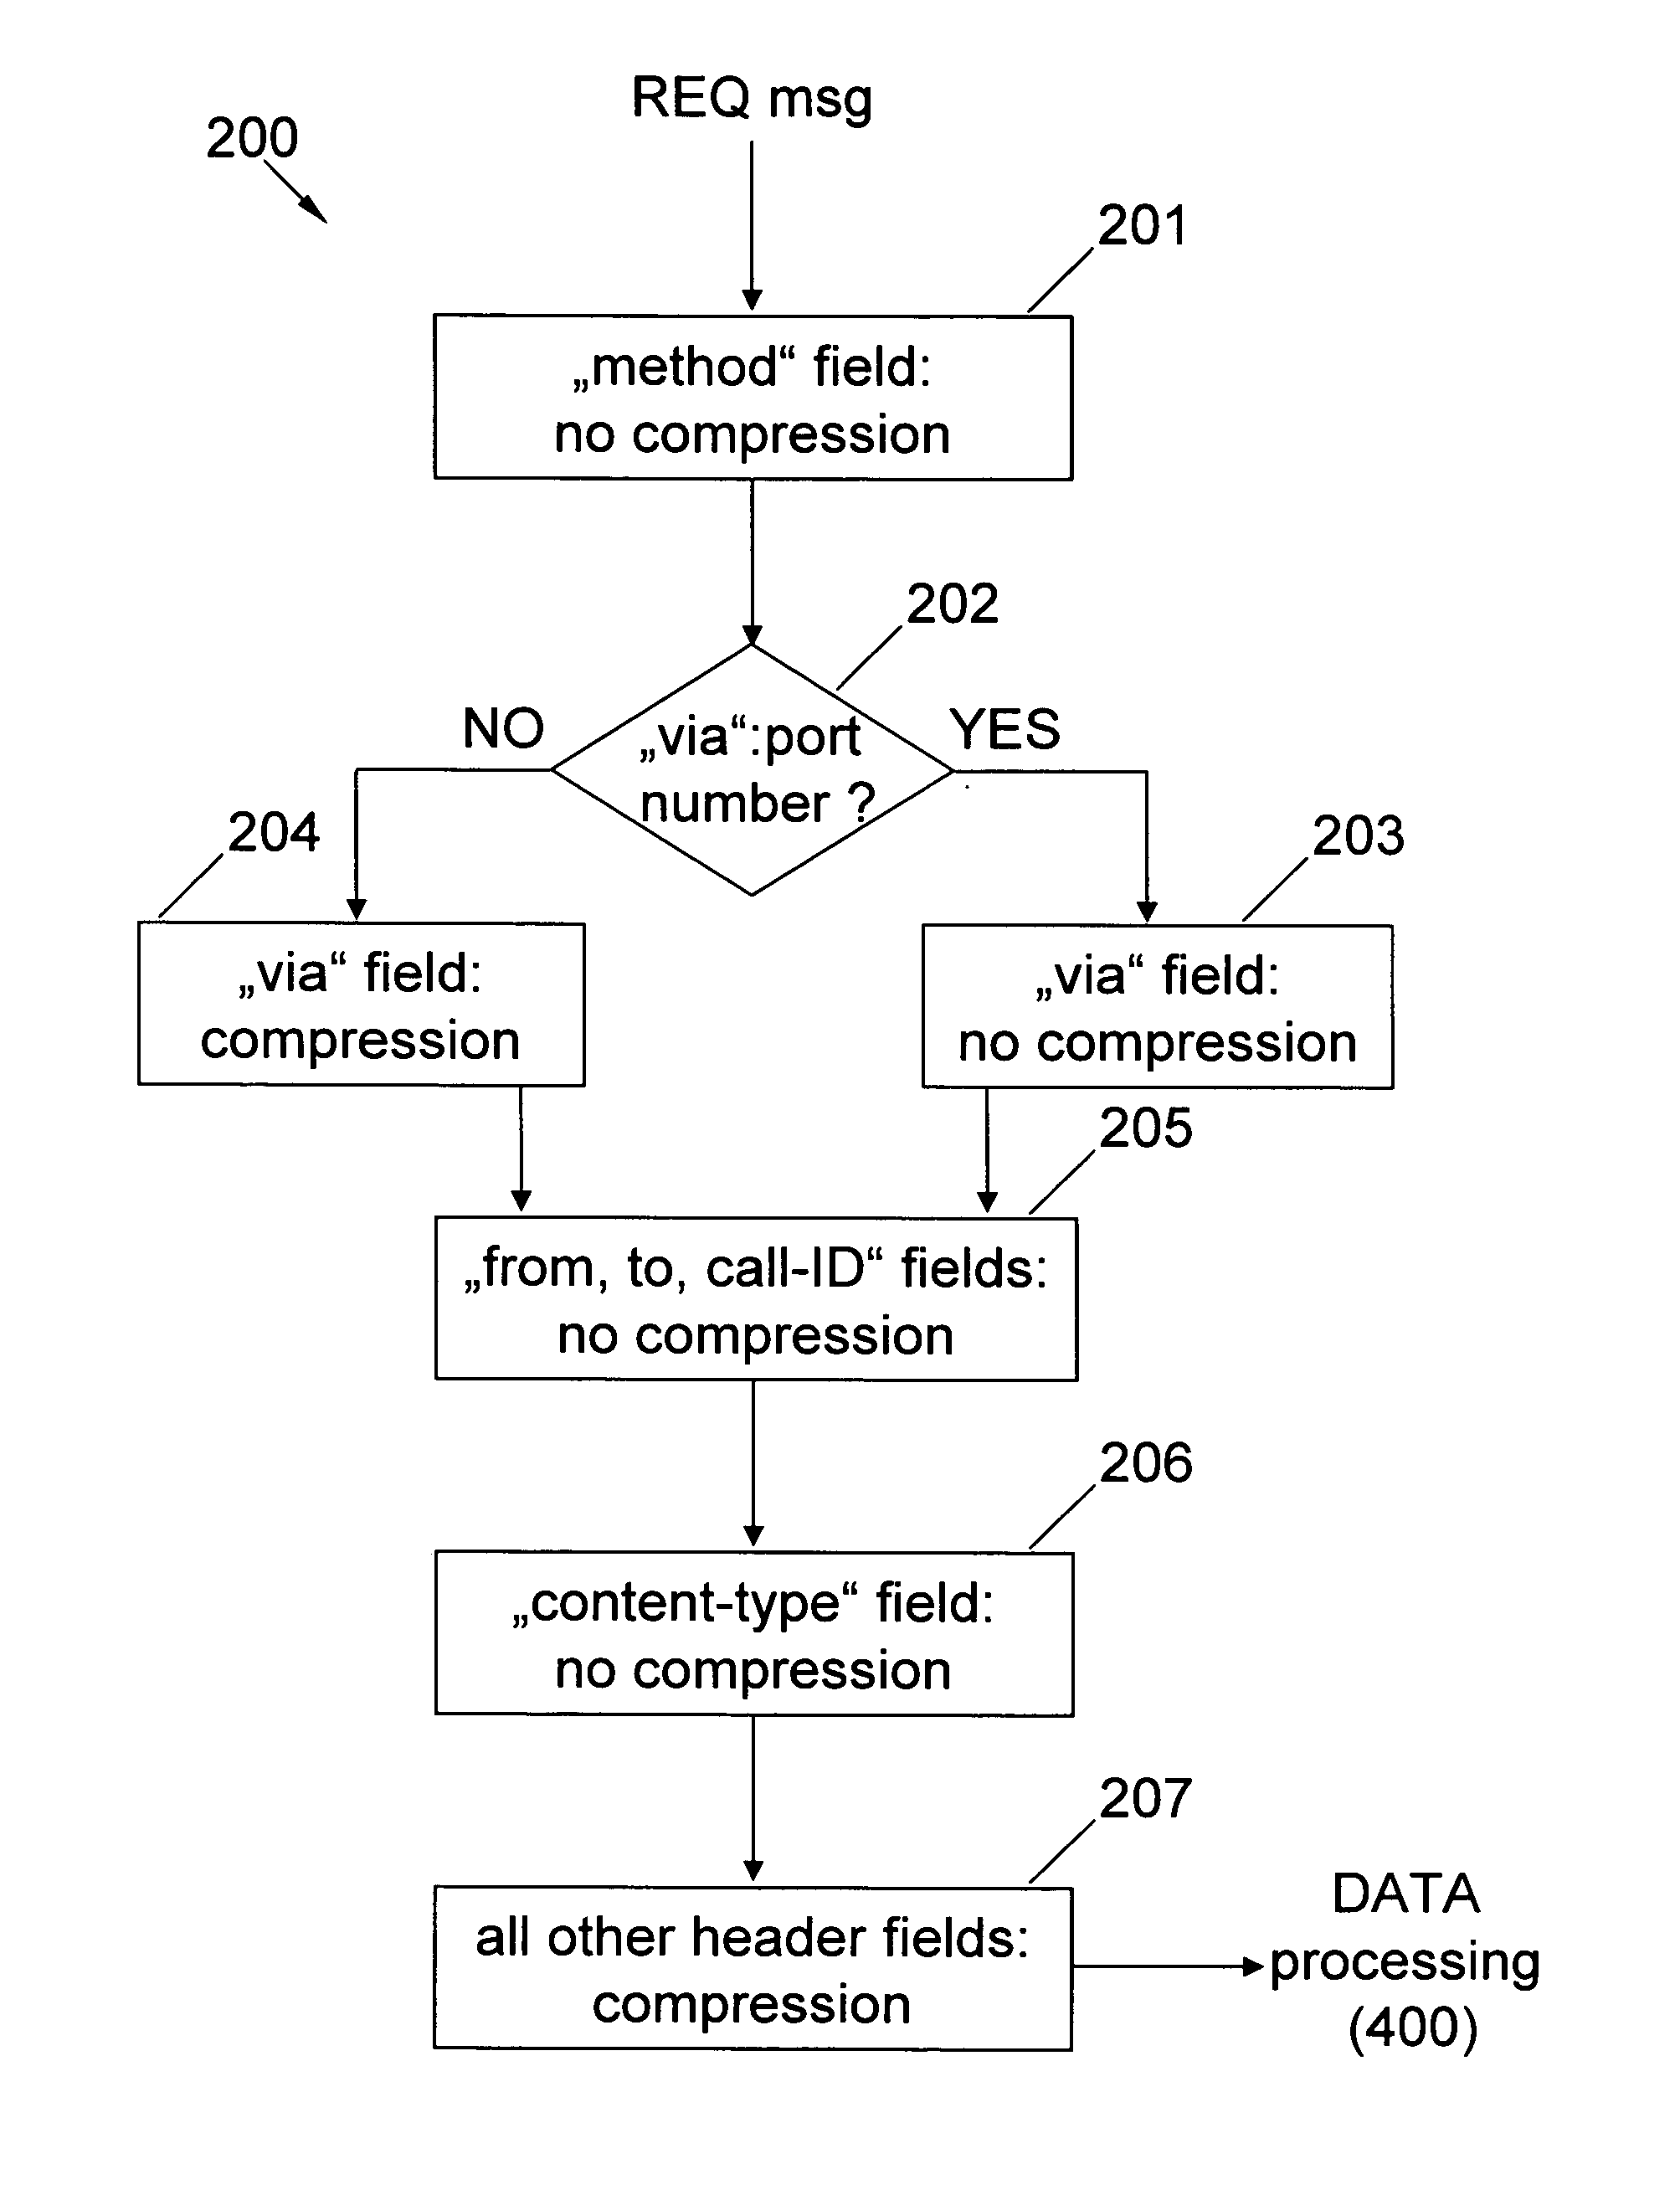 Compressing, filtering, and transmitting of protocol messages via a protocol-aware intermediary node